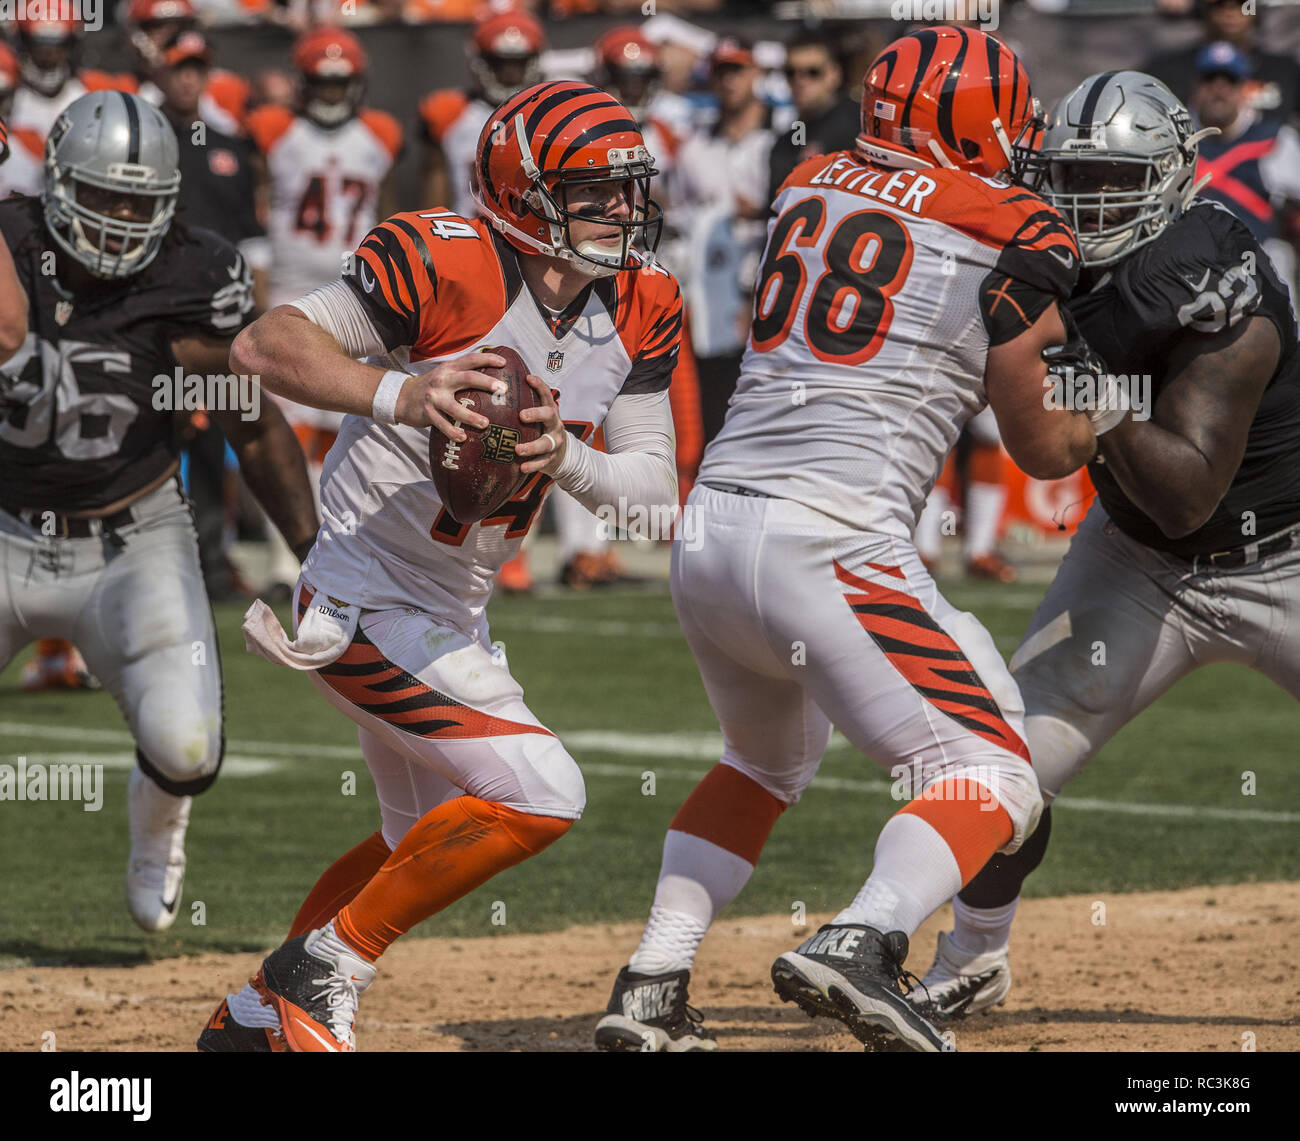 Oakland, California, USA. 13th Sep, 2015. Cincinnati Bengals quarterback Andy Dalton (14) moves out of pocket on Sunday, September 13, 2015, at O.co Coliseum in Oakland, California. The Bengals defeated the Raiders 33-13. Credit: Al Golub/ZUMA Wire/Alamy Live News Stock Photo